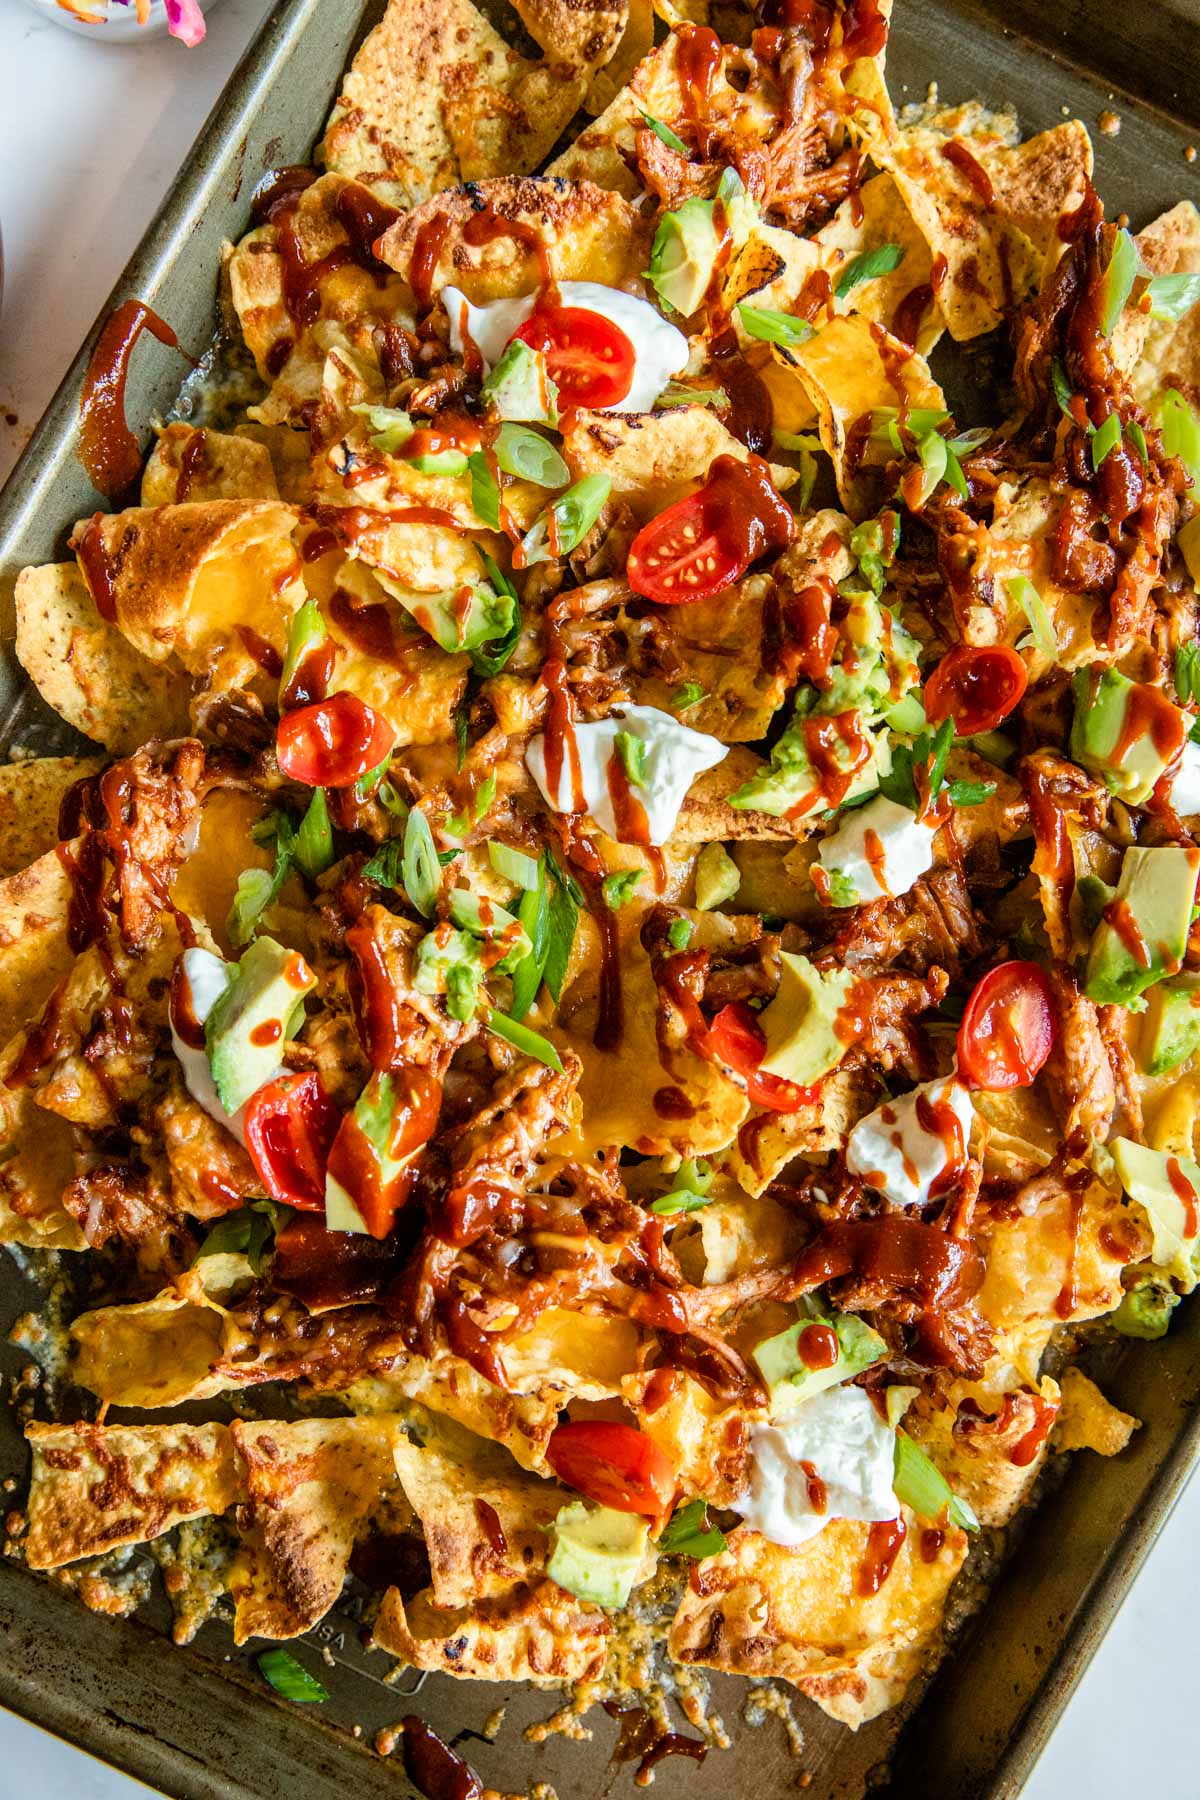 bbq pulled pork nachos fresh from the oven on a baking sheet topped wit toppings